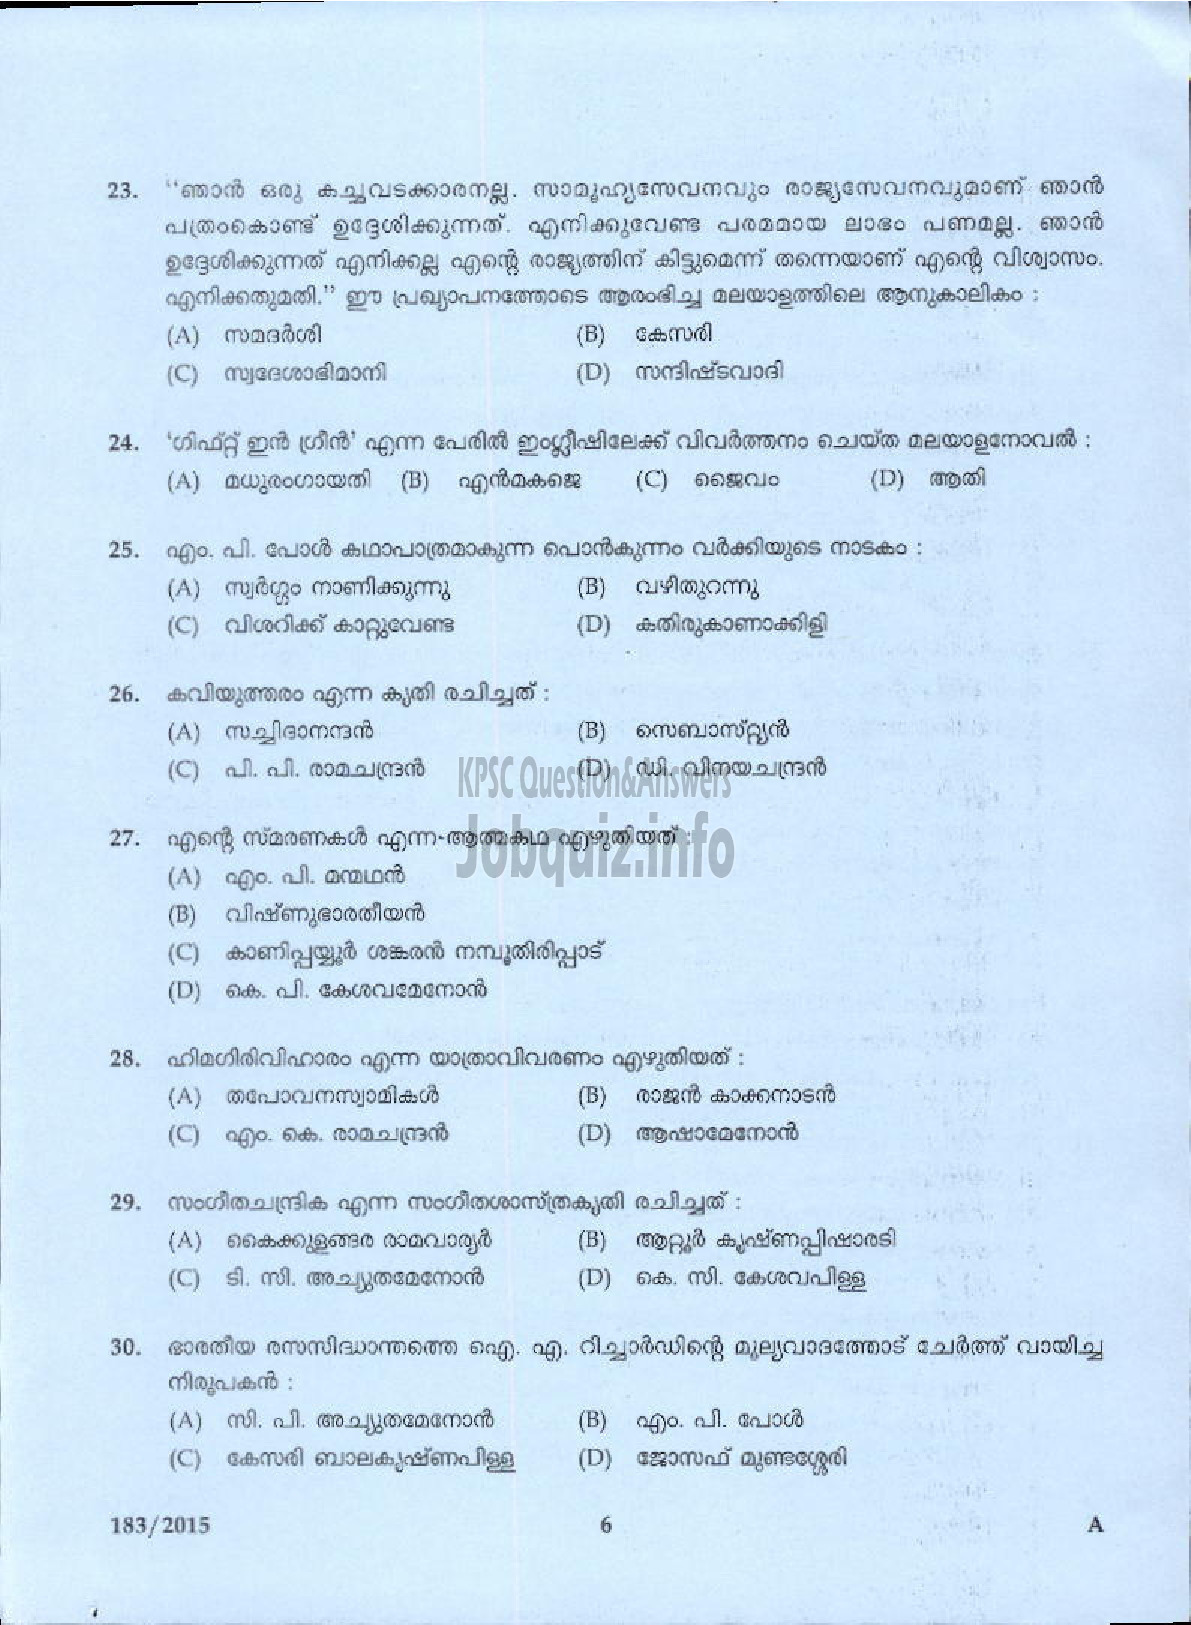 Kerala PSC Question Paper - LECTURER IN MALAYALAM COLLEGIATE EDUCATION-4